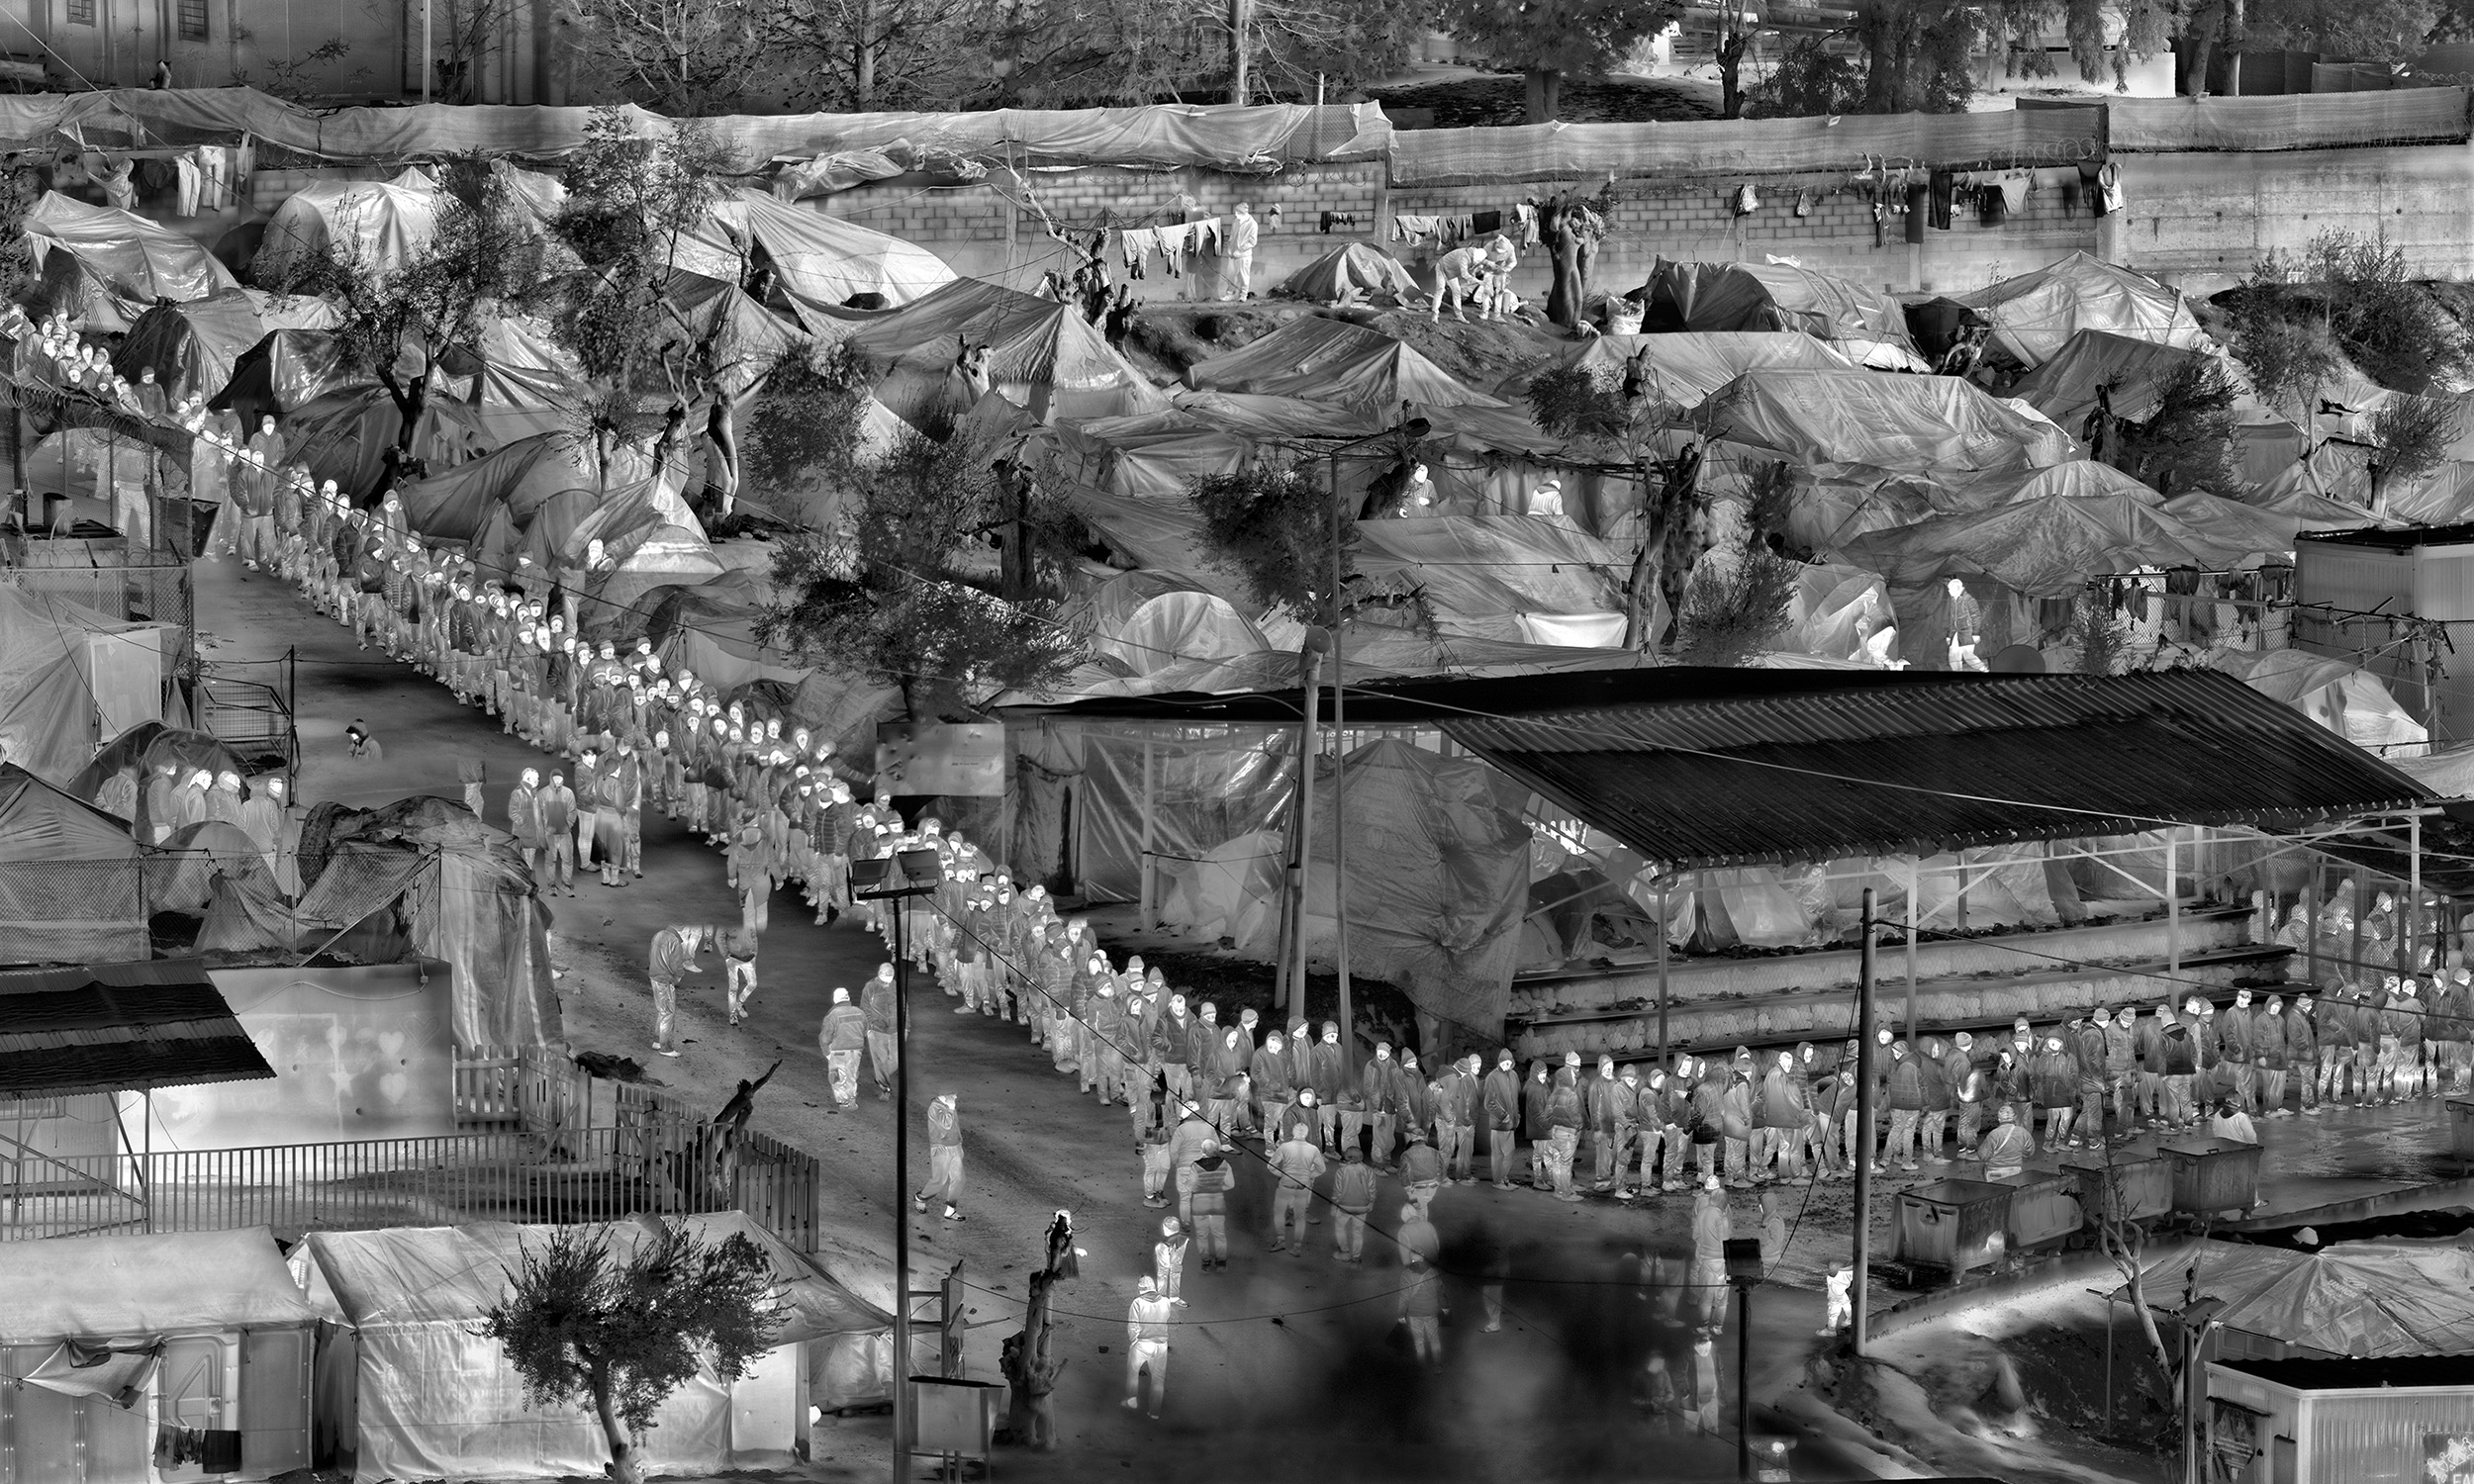 Richard Mosse, Detail from <em>Moria in Snow</em>, Lesbos, Greece, 2017, digital C print on metallic paper, 35.5 x 120 inches